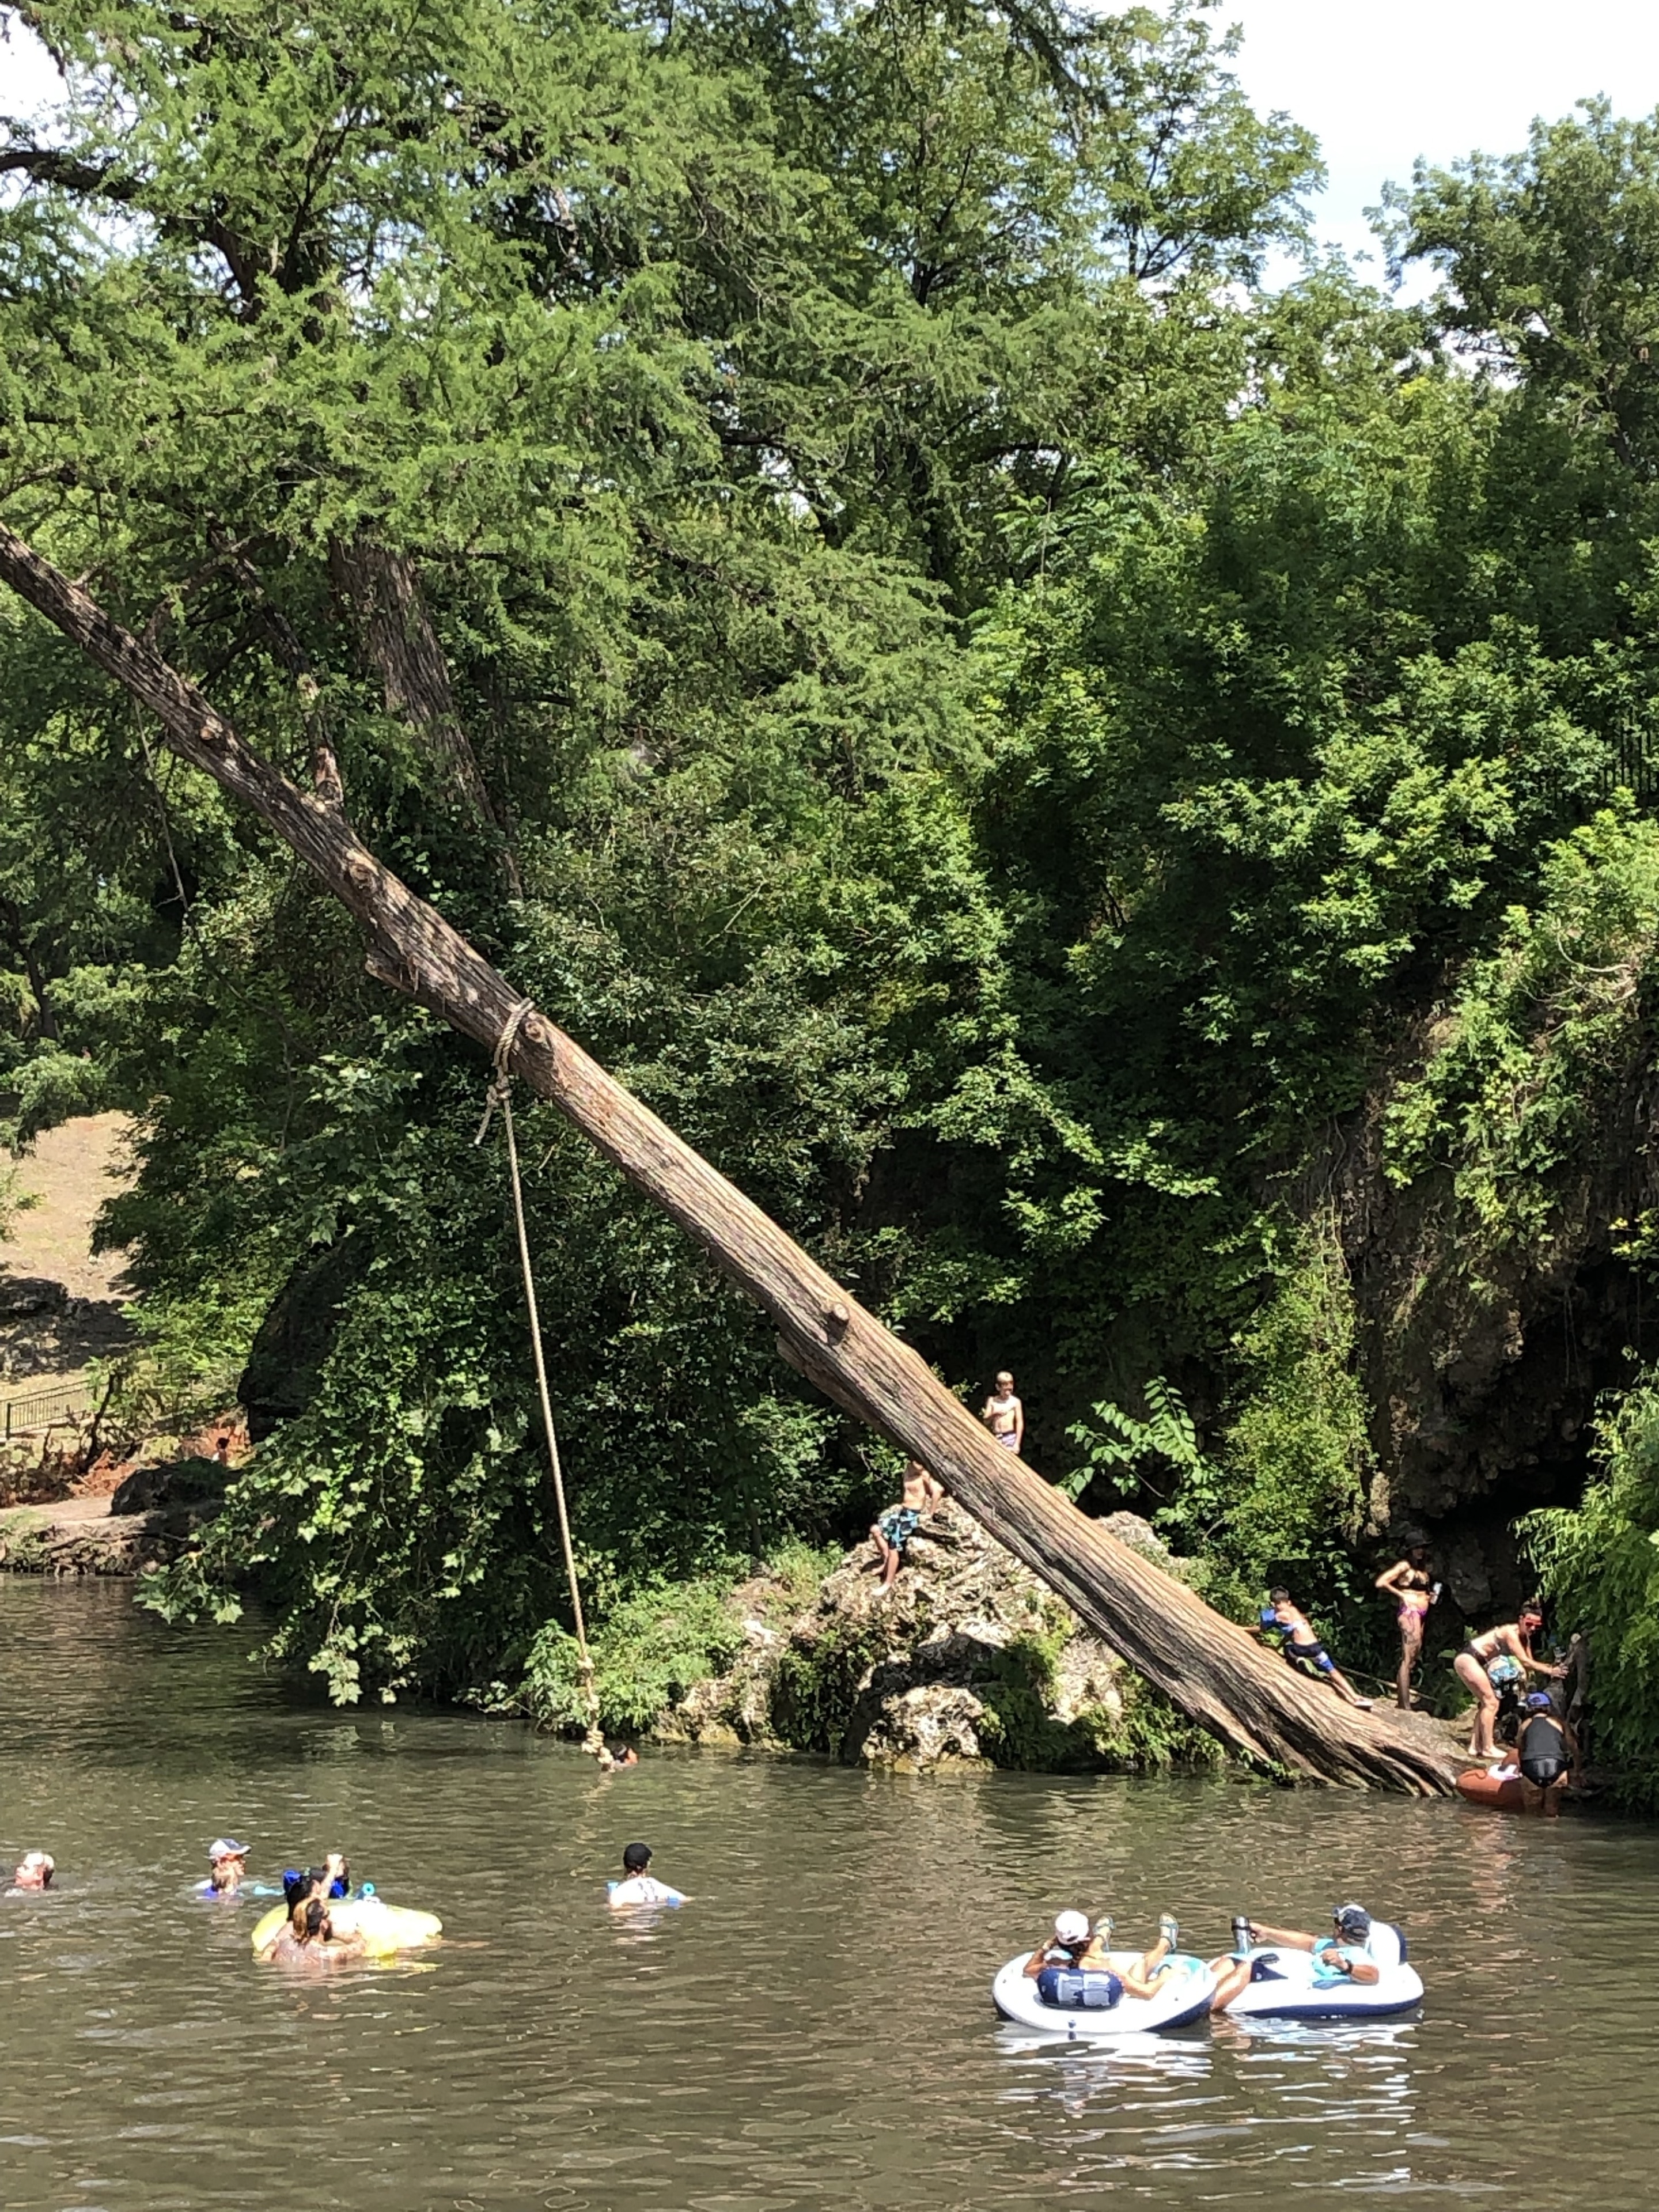 Krause Springs is situated in the center of Texas and has the most unique waterfall and swimming hole.  Best on a hot day since the spring water can be pretty chilly.  The rope swing is an added bonus.